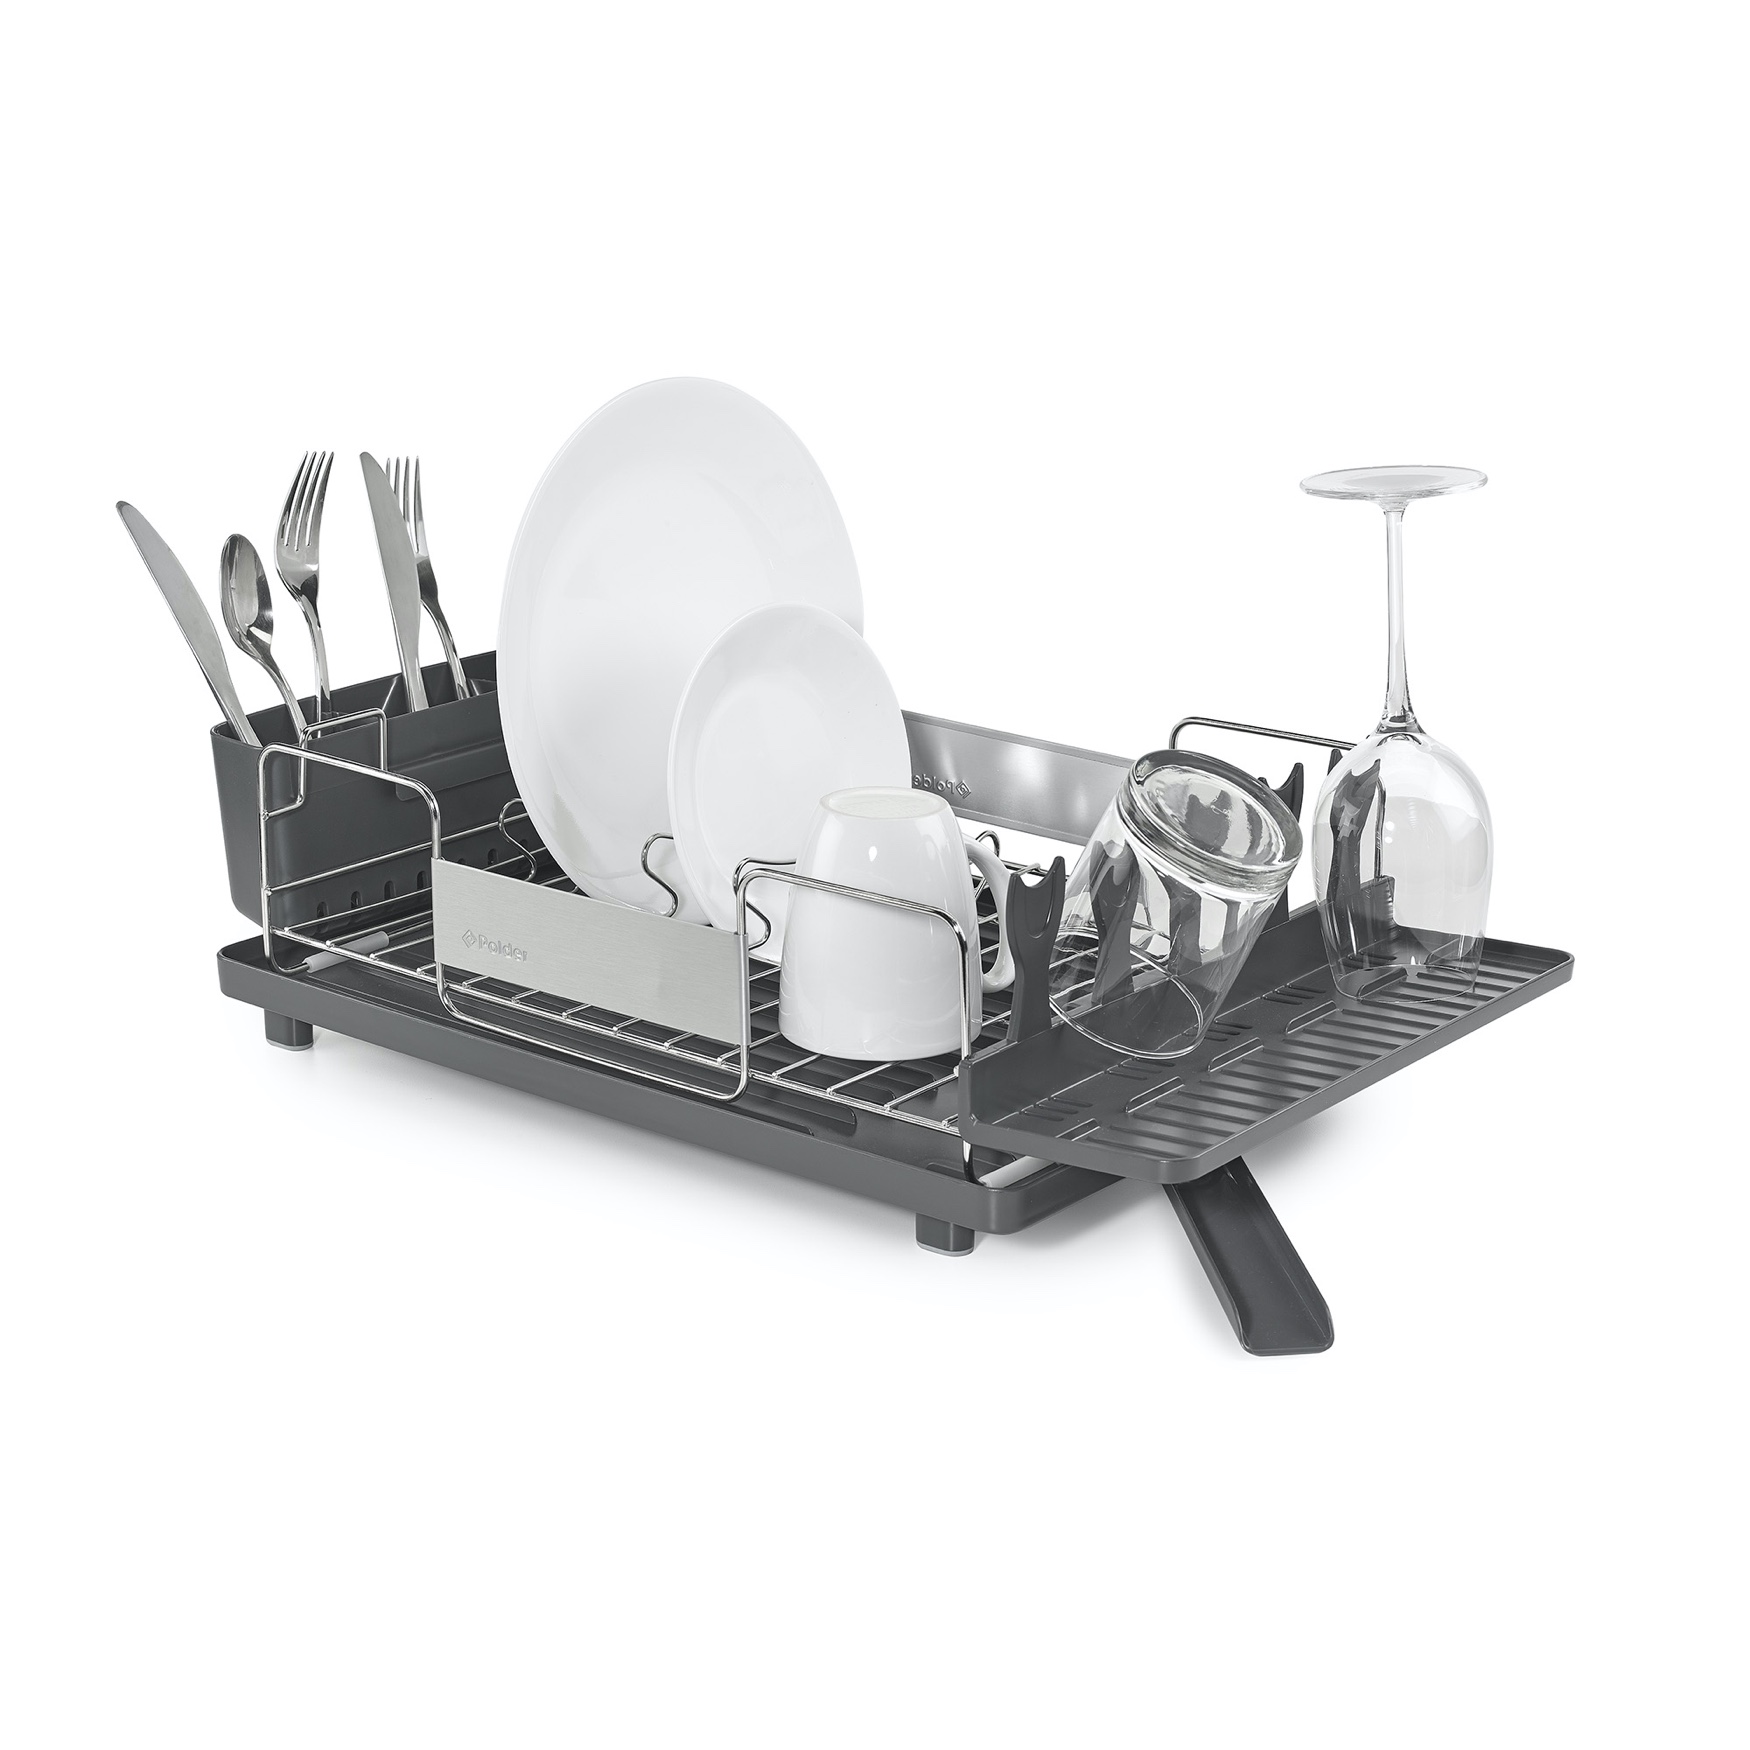 Space Station Dish Rack, STAINLESS STEEL